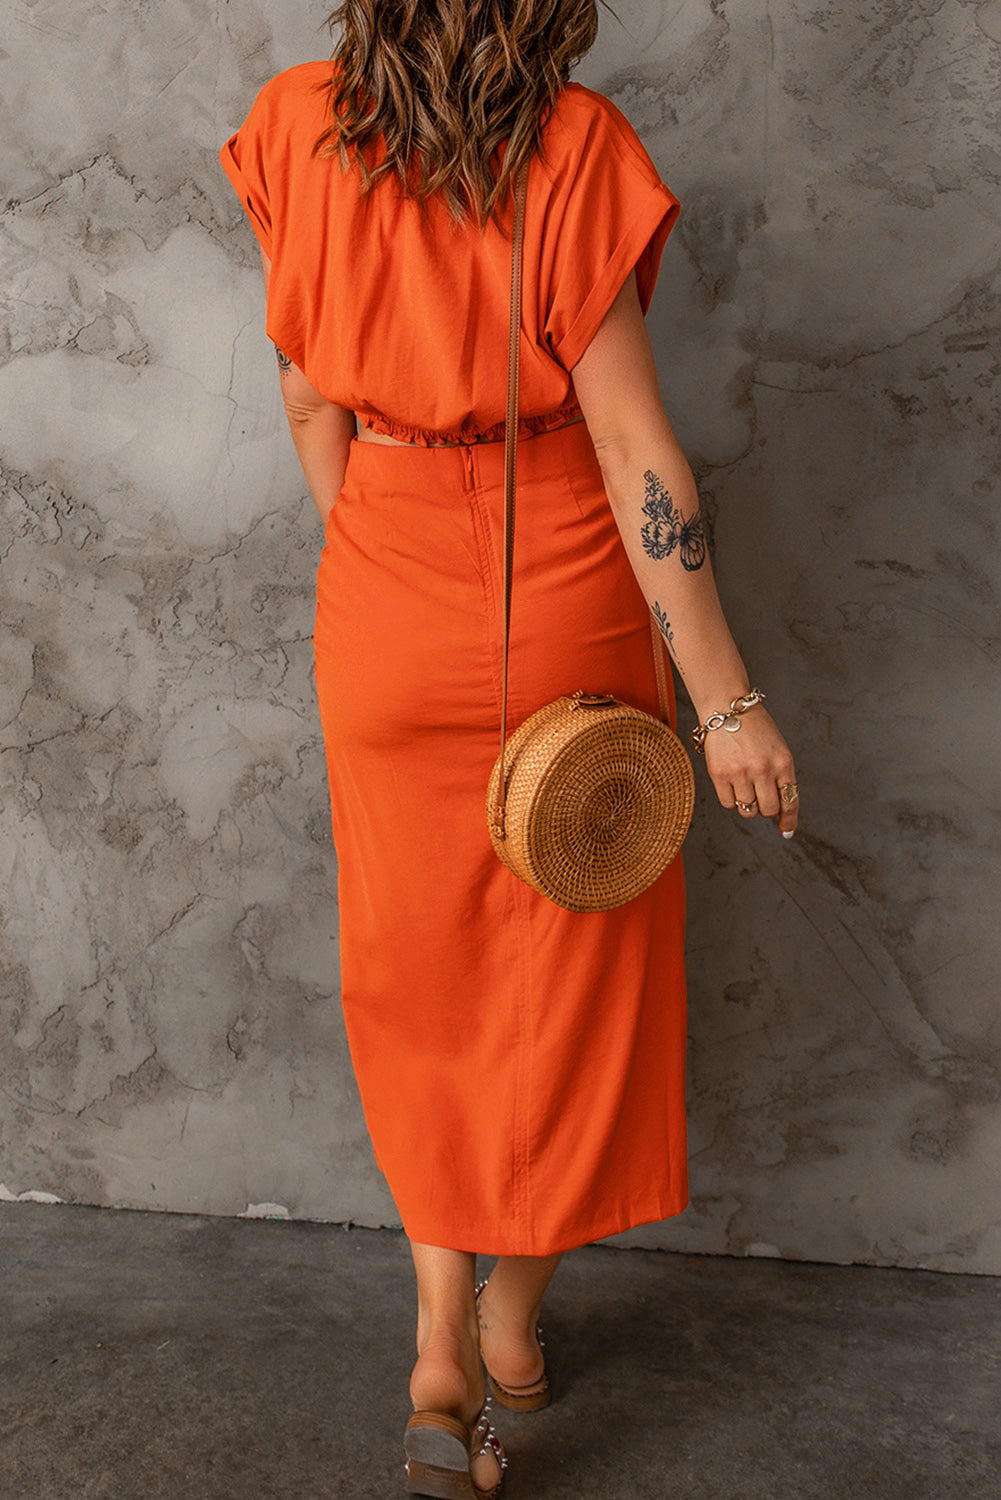 Blissful Moments Cropped Top and Skirt Set in Orange